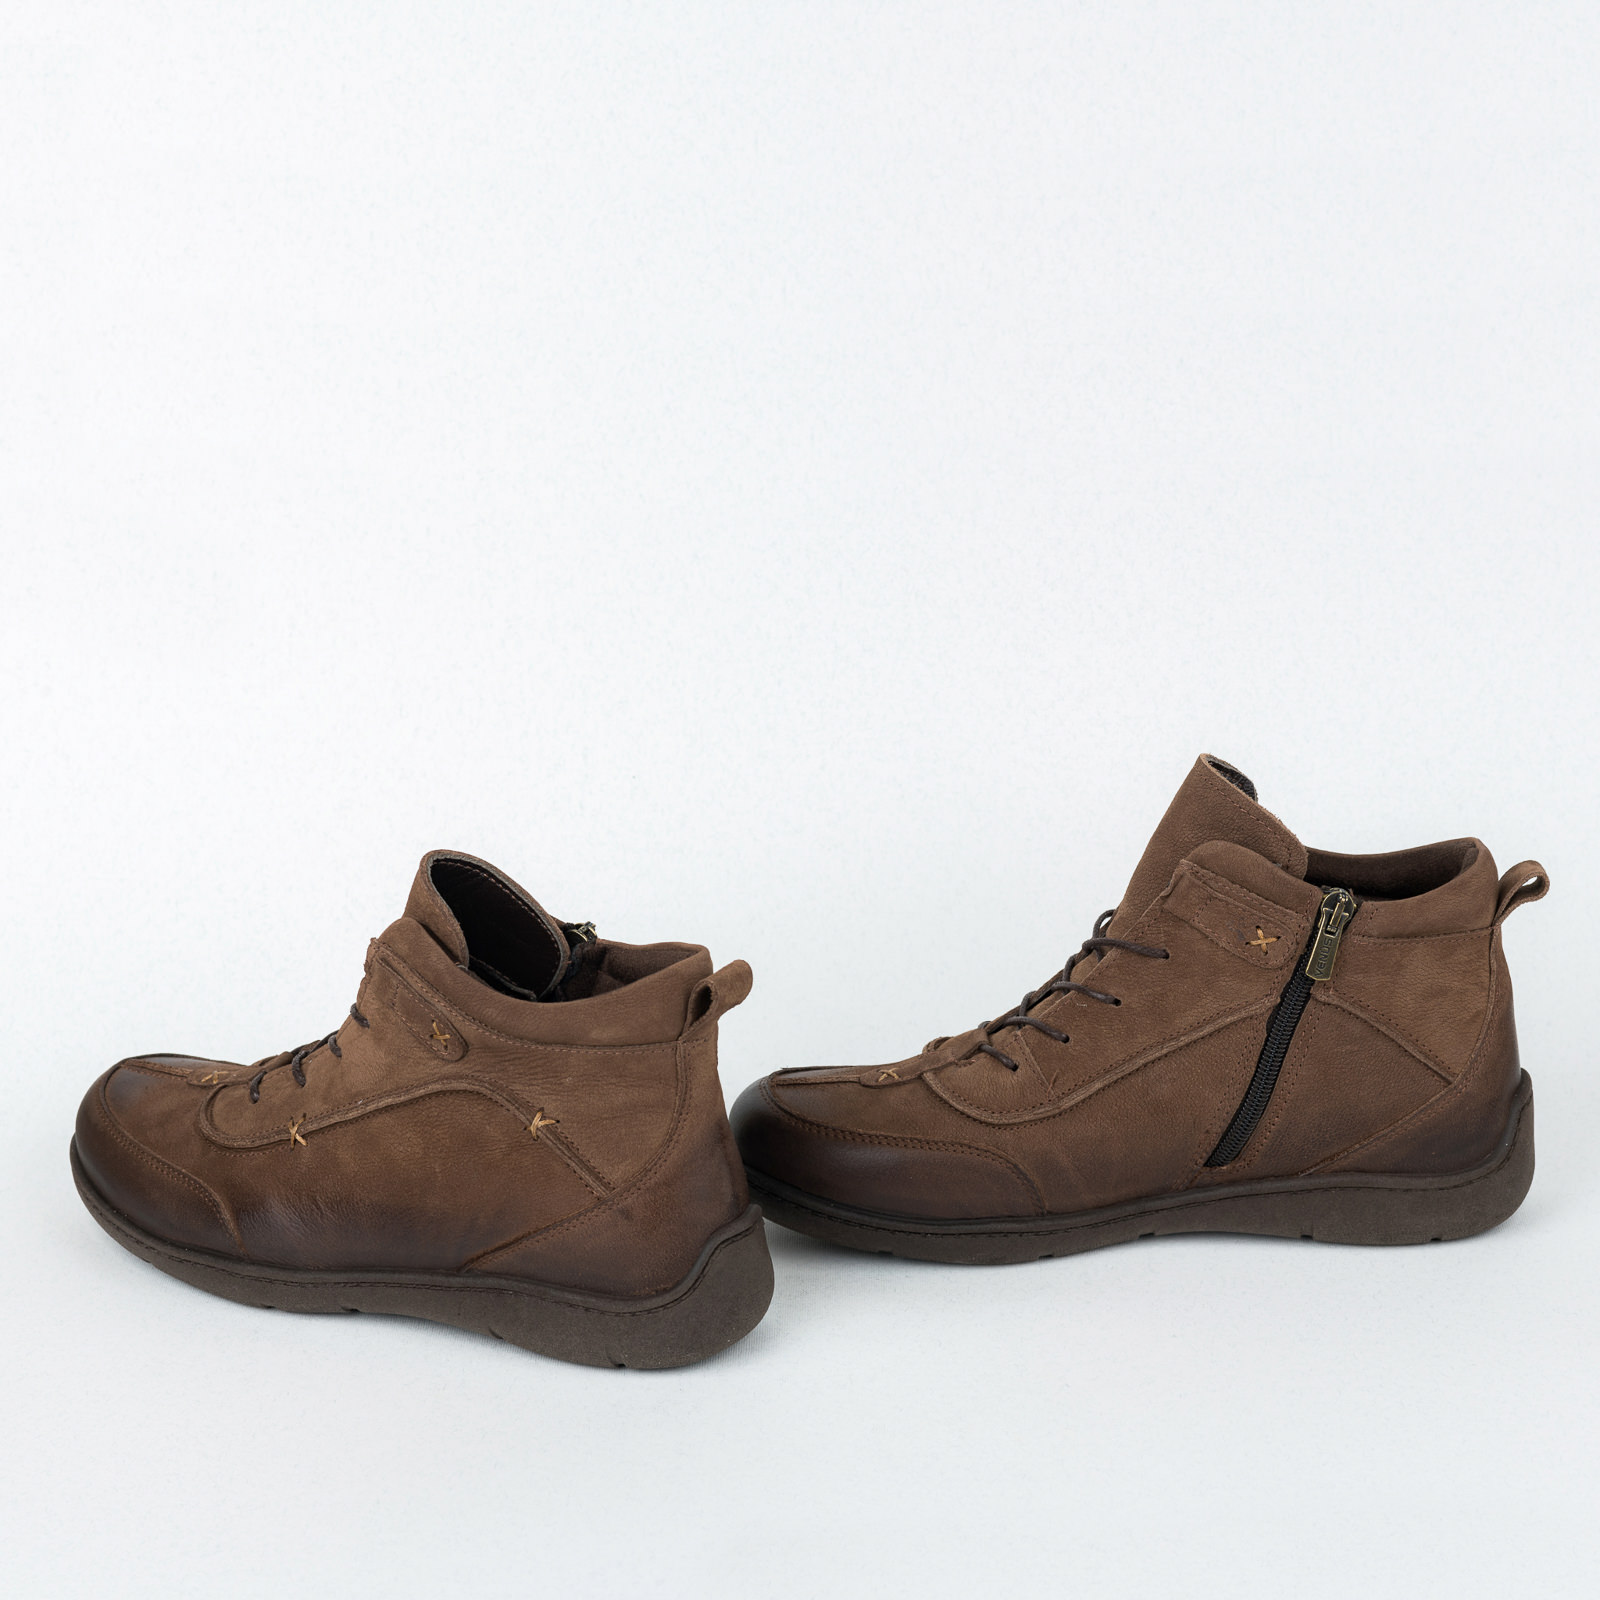 Leather ankle boots B631 - BROWN